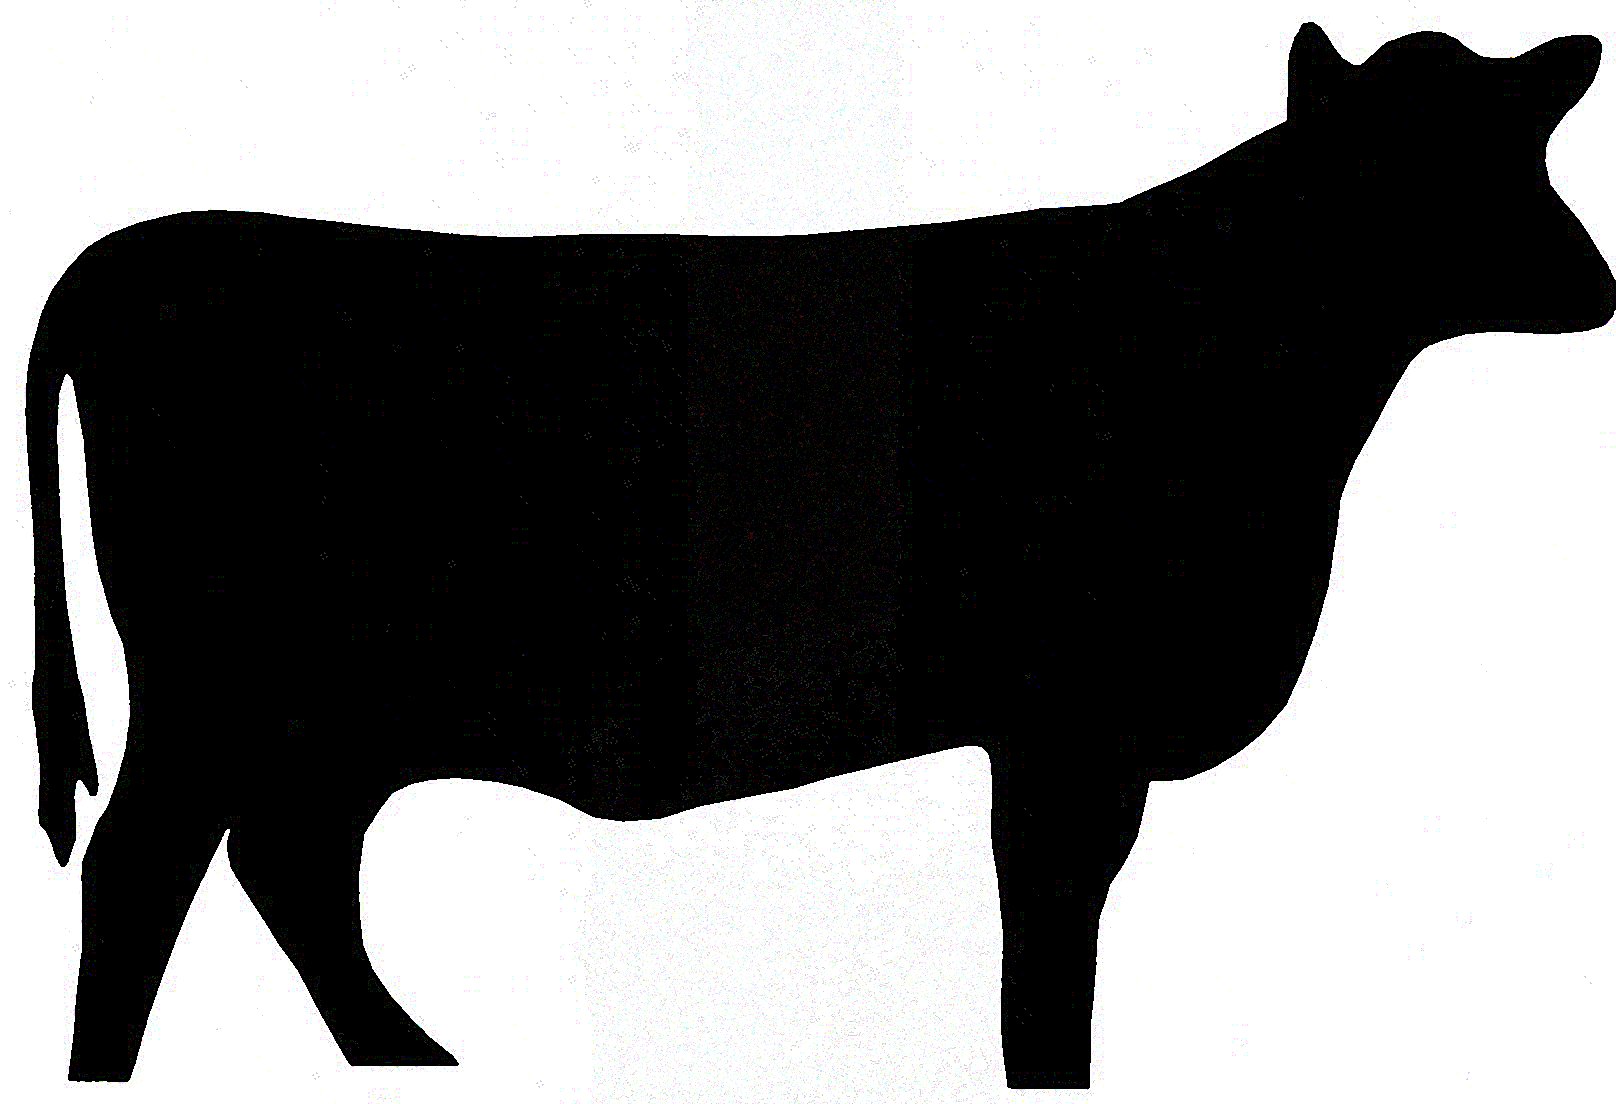 Cow Right Face - A profile of